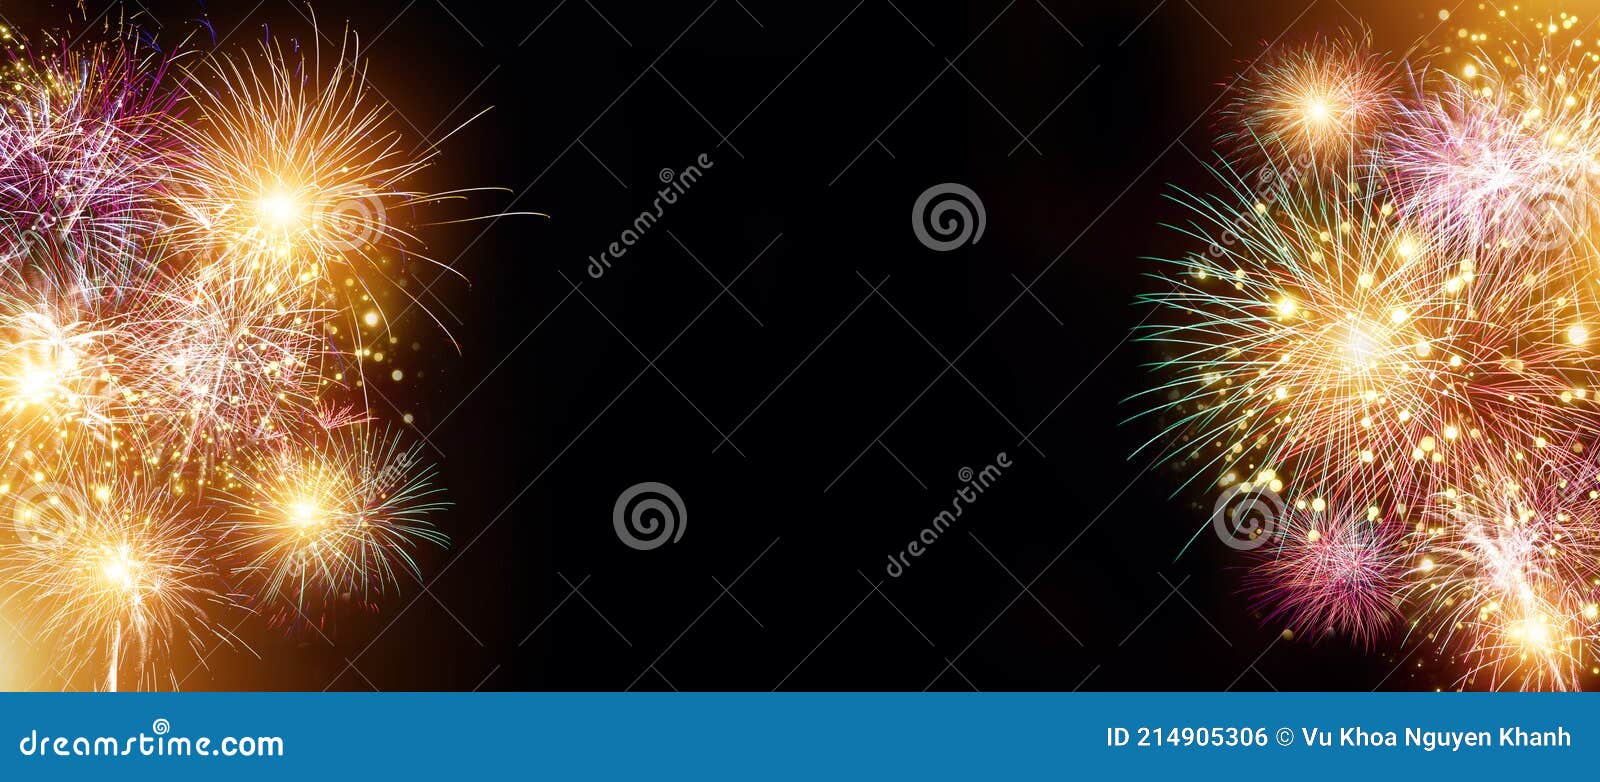 Festival Fireworks Frame. Bright Crackers Lights in Night Sky, Firework  Banner and Traditional Celebration Background . Abstract Stock Photo -  Image of display, abstract: 214905306